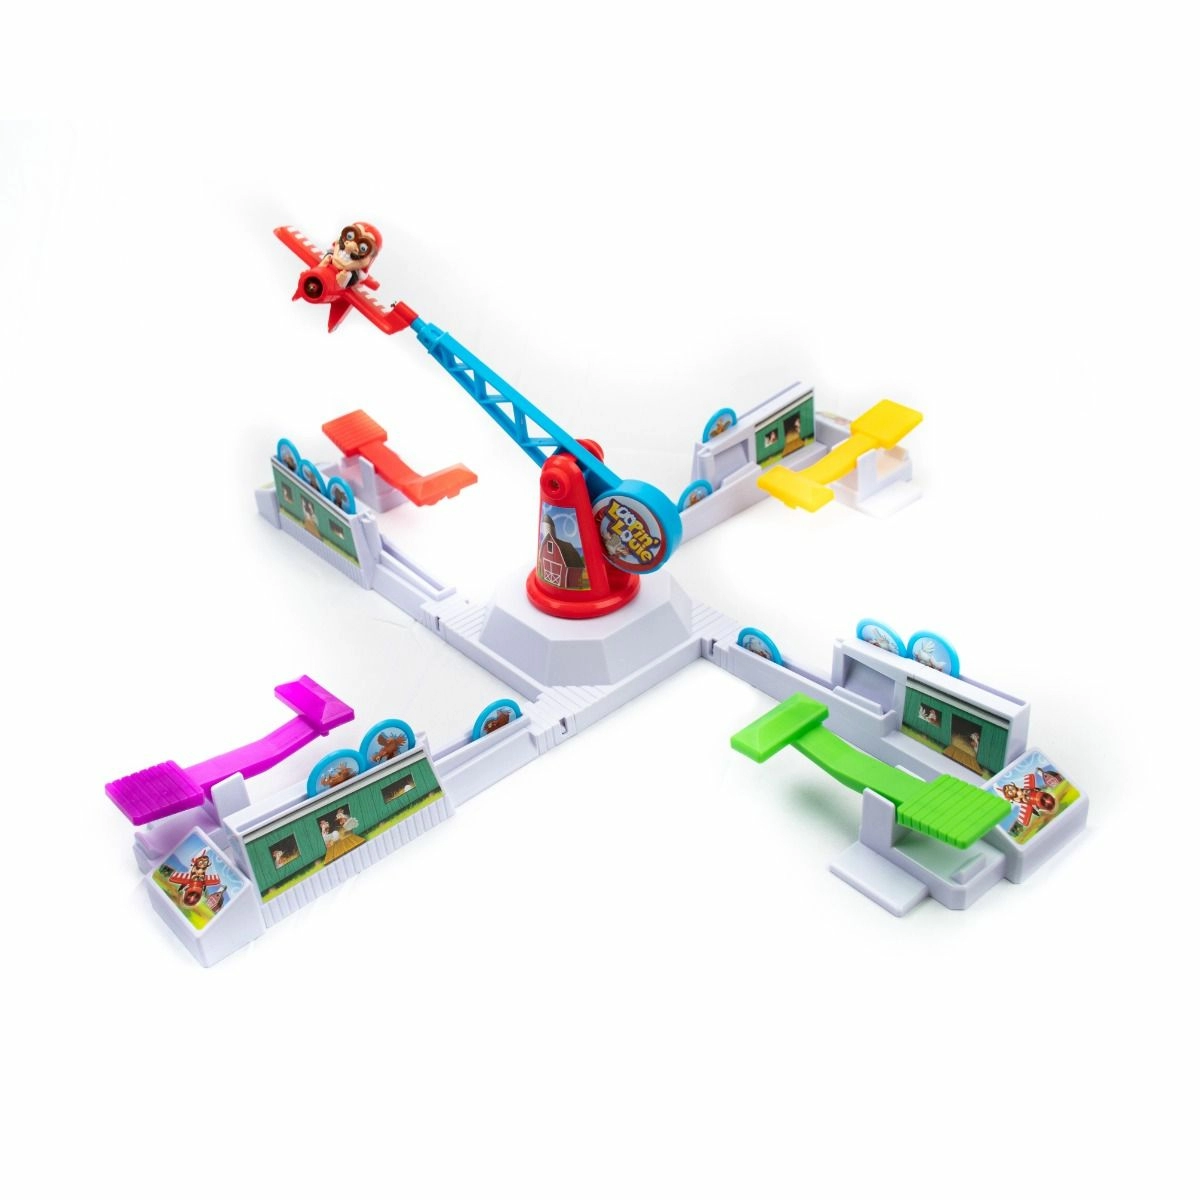 reagere opbevaring Patronise Loopin Louie - Mind Games